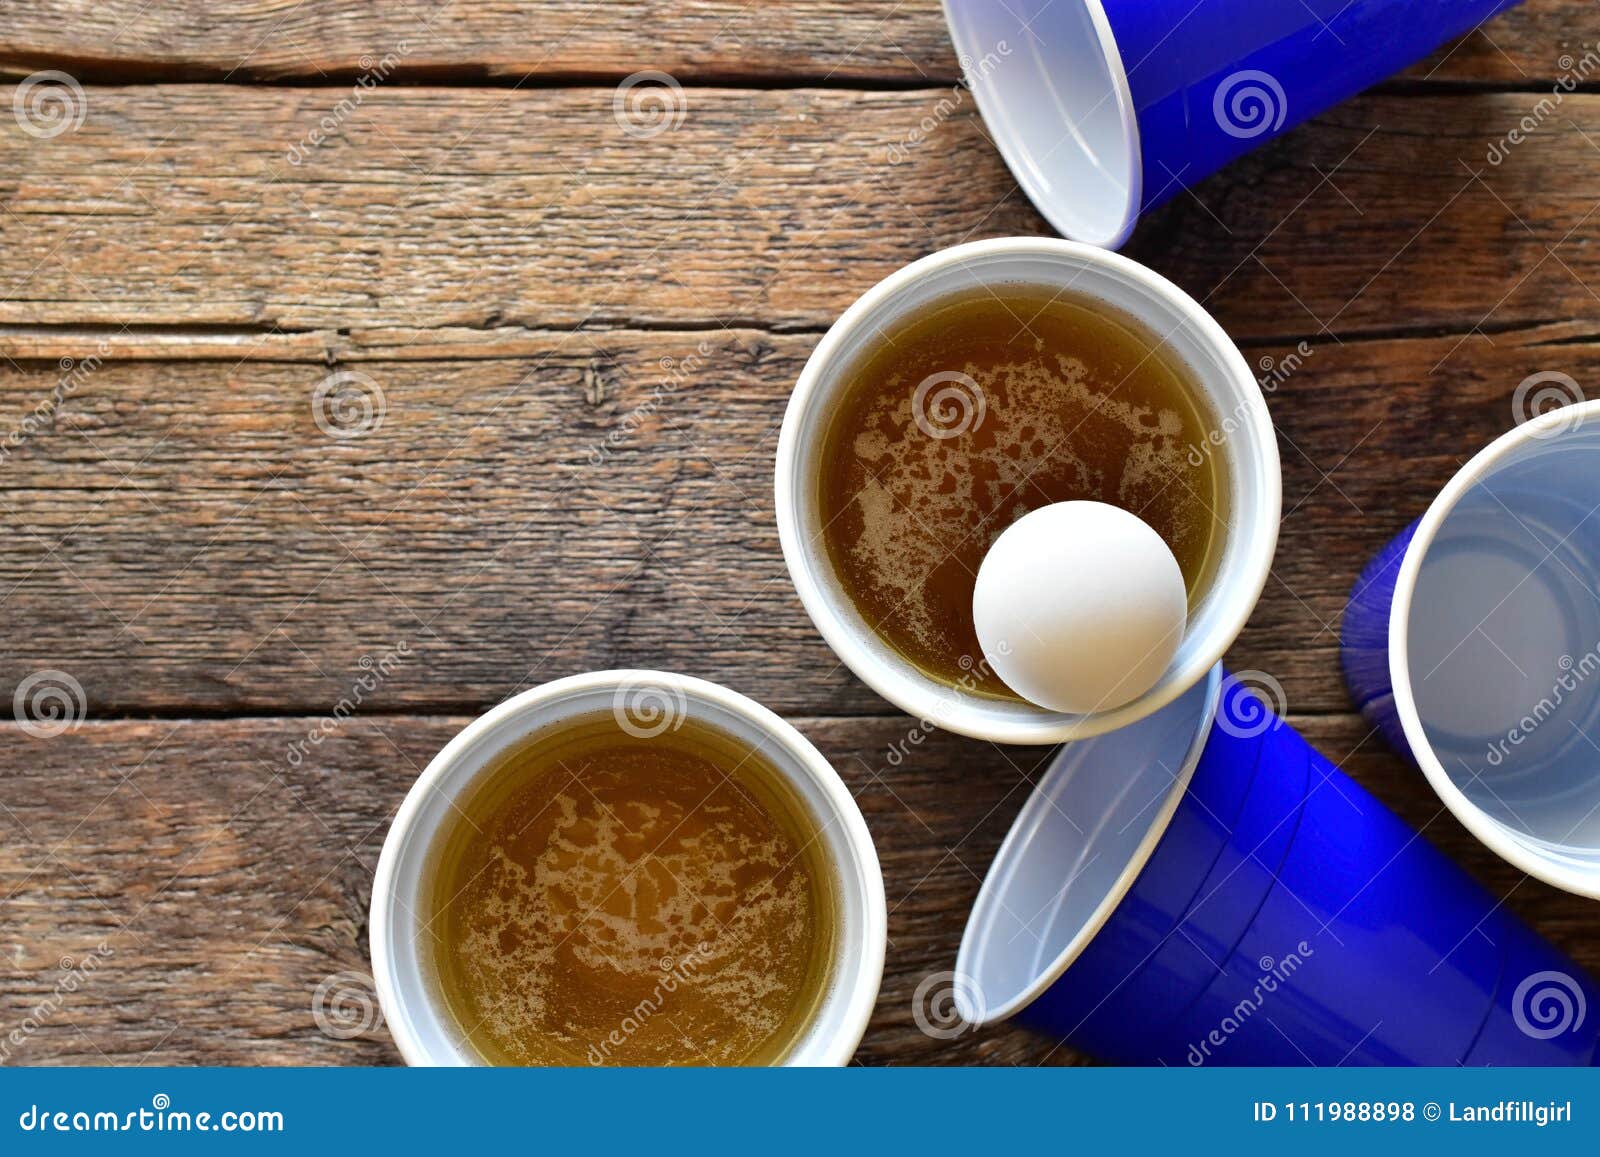 Blue Plastic Drinking Cups stock photo. Image of cups